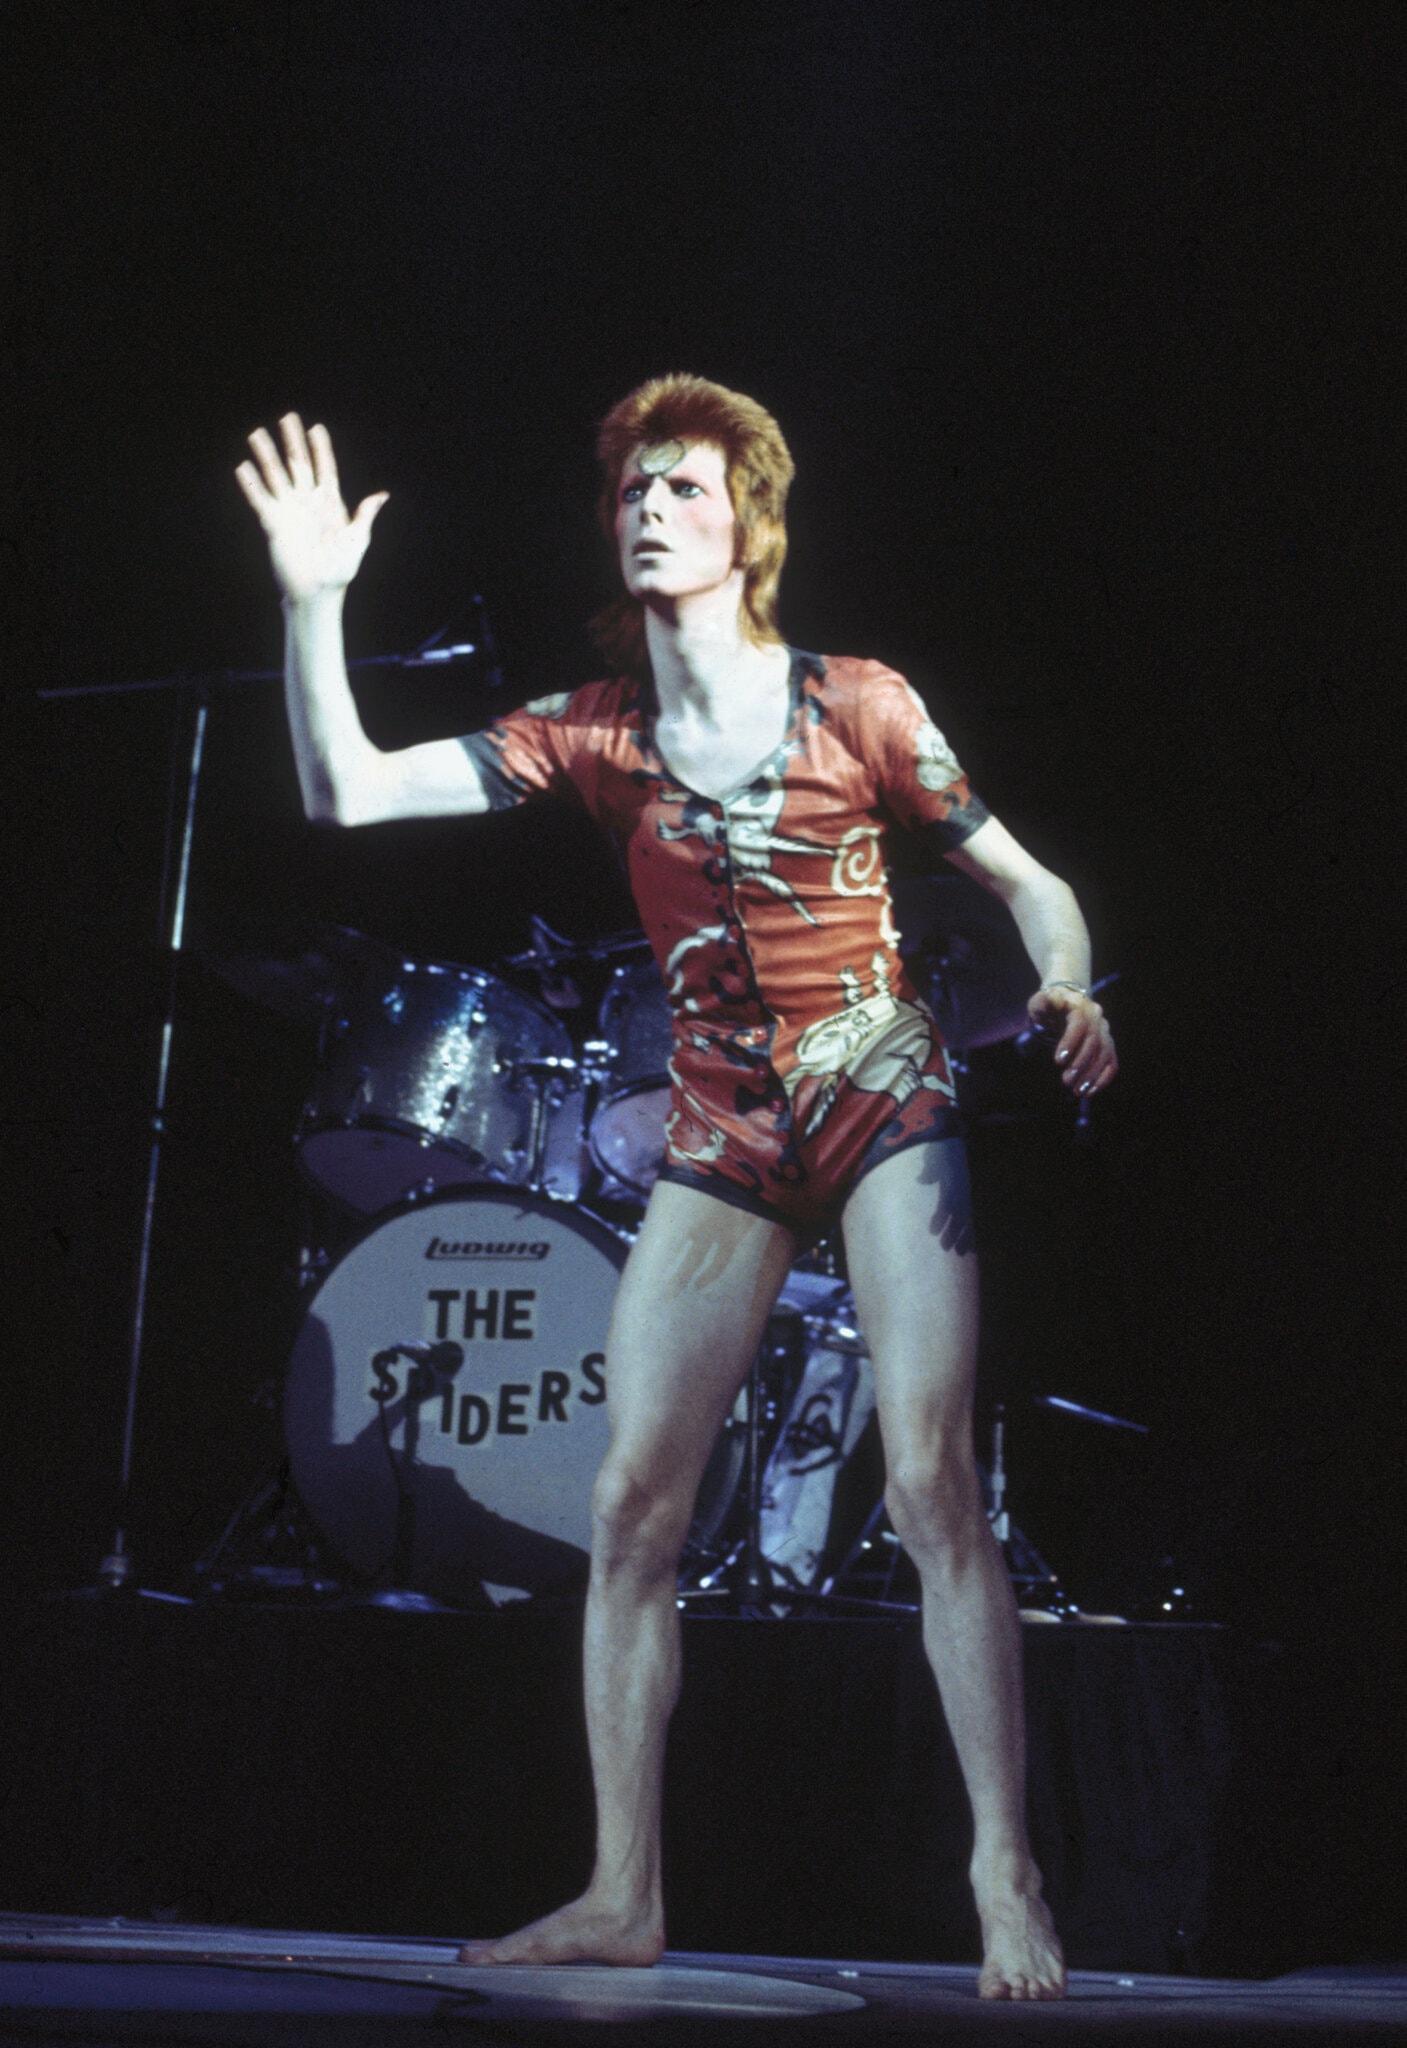 Watch That Man: David Bowie - dressed by Kansai Yamamoto - Snap Galleries  Limited